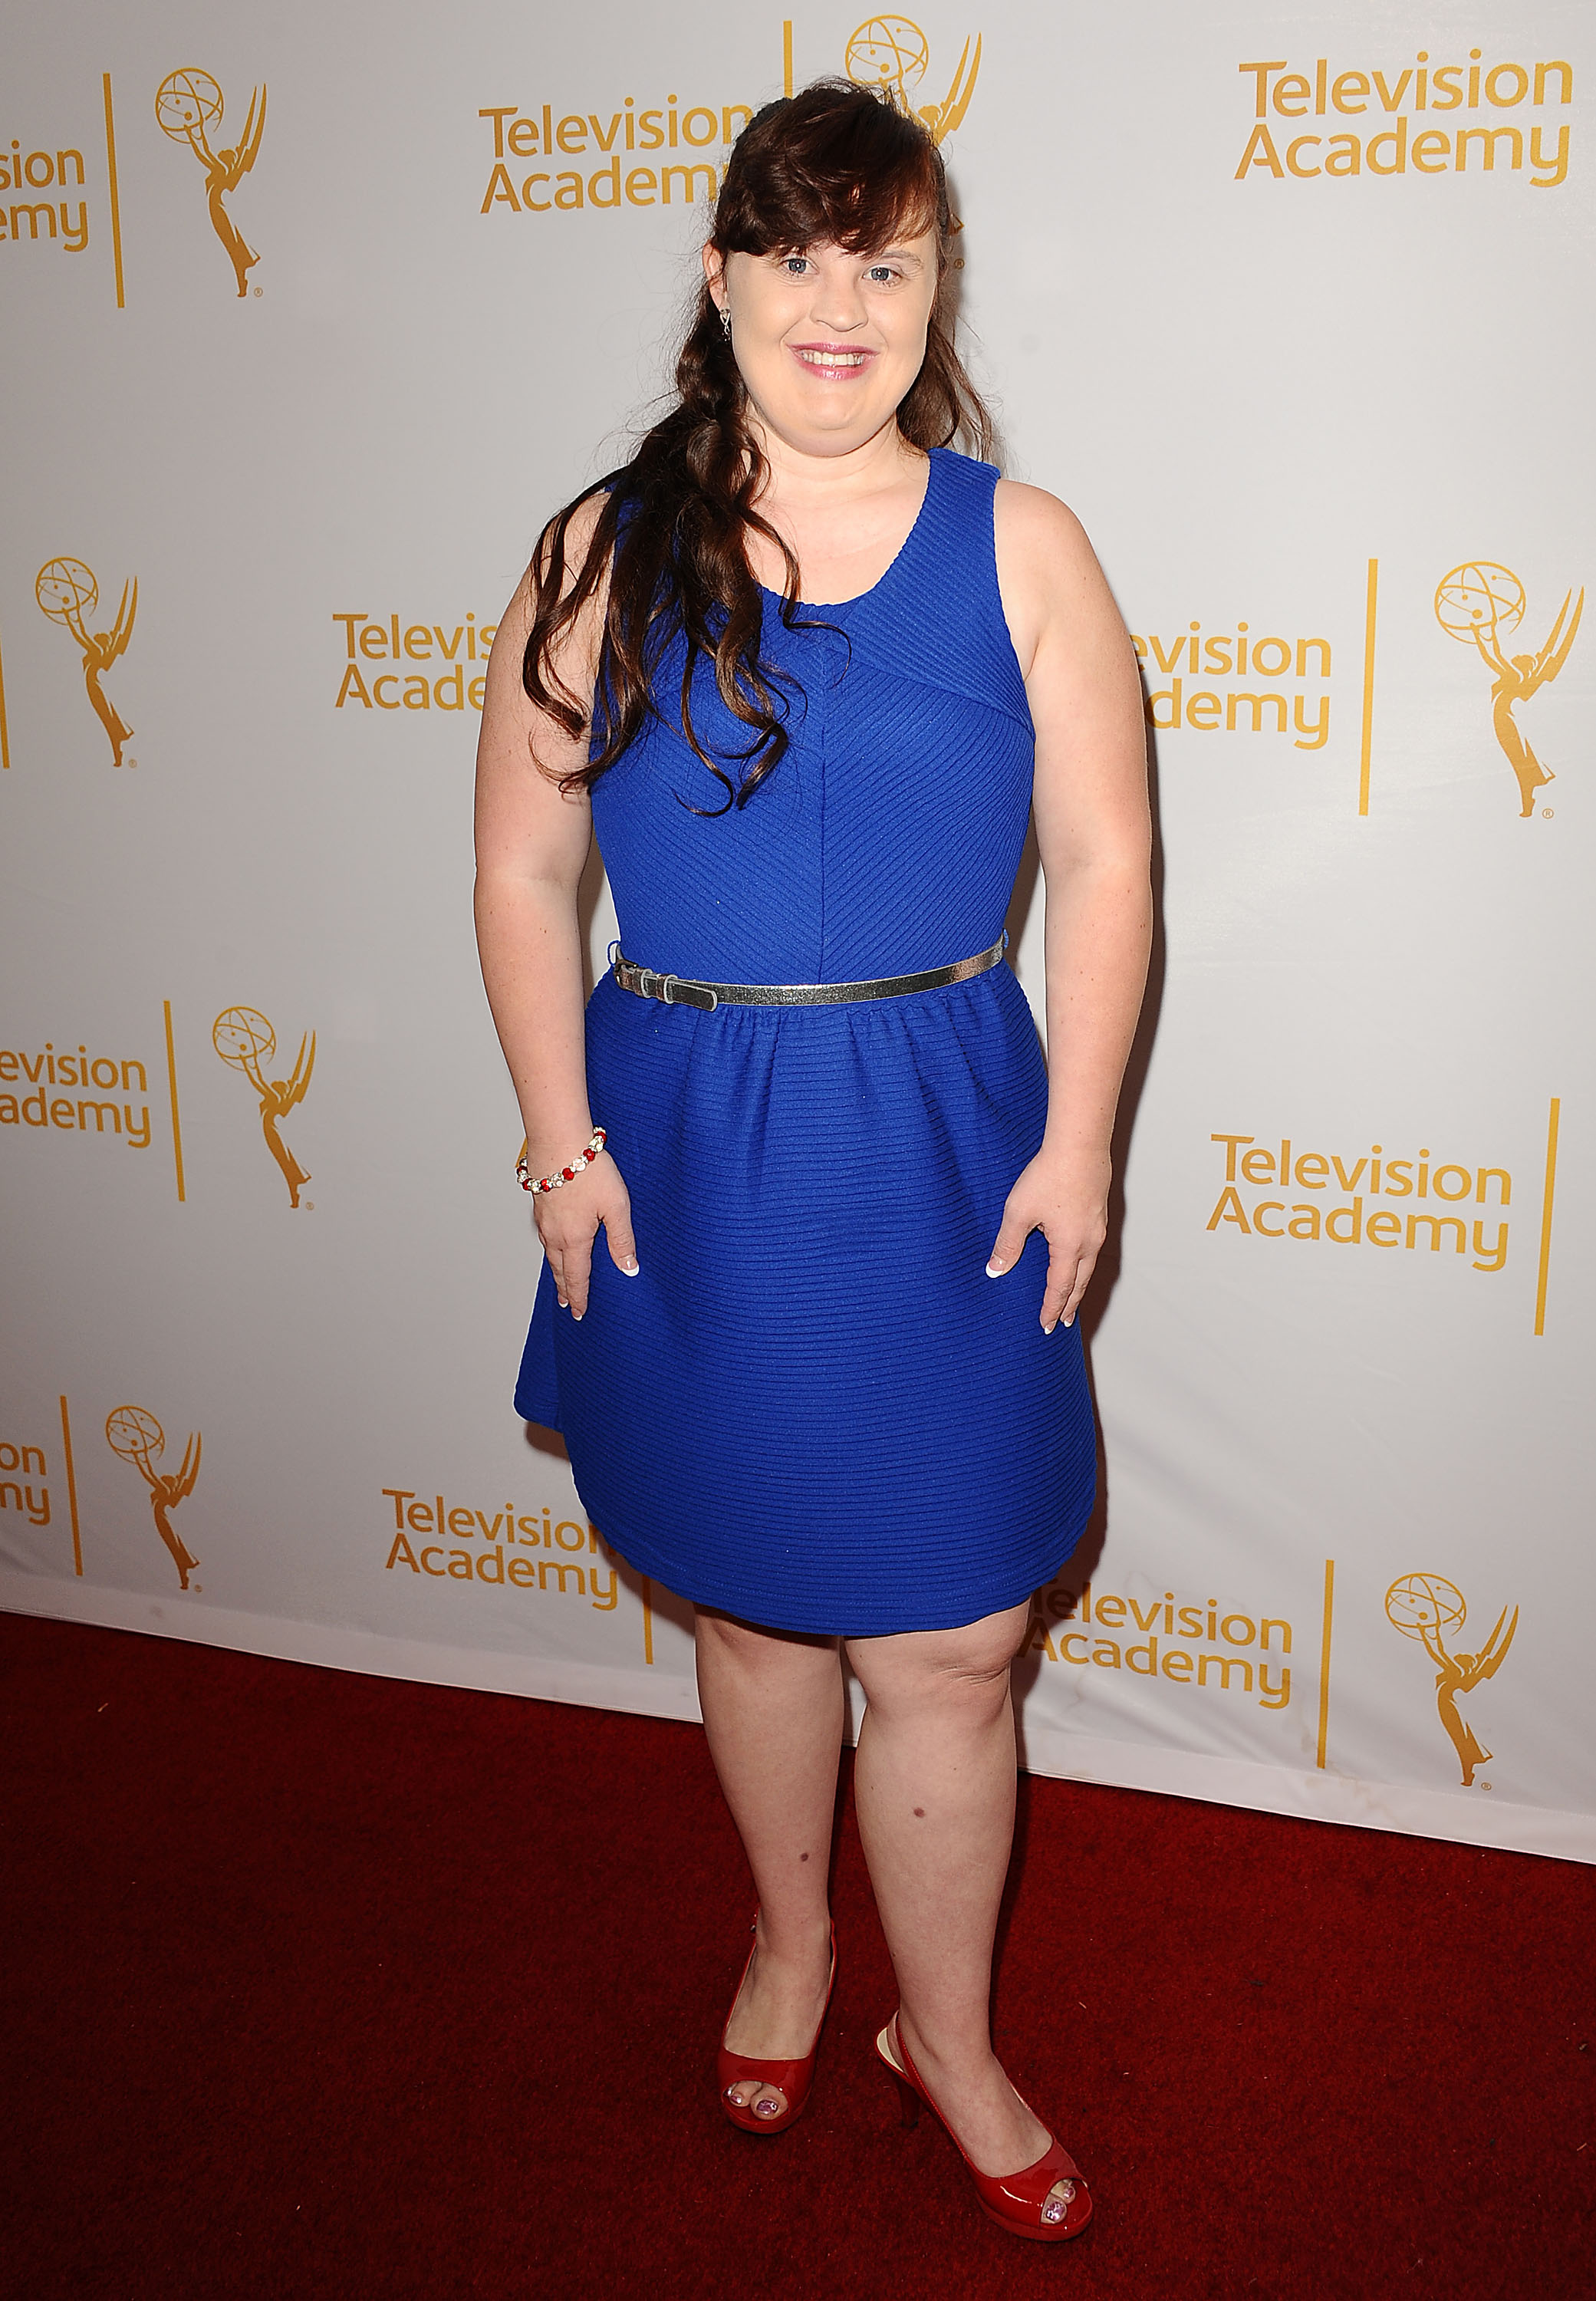 BEVERLY HILLS, CA - JULY 28: Actress Jamie Brewer attends the Television Academy's Performers Peer Group celebrating the 66th Emmy Awards at Montage Beverly Hills on July 28, 2014 in Beverly Hills, CA